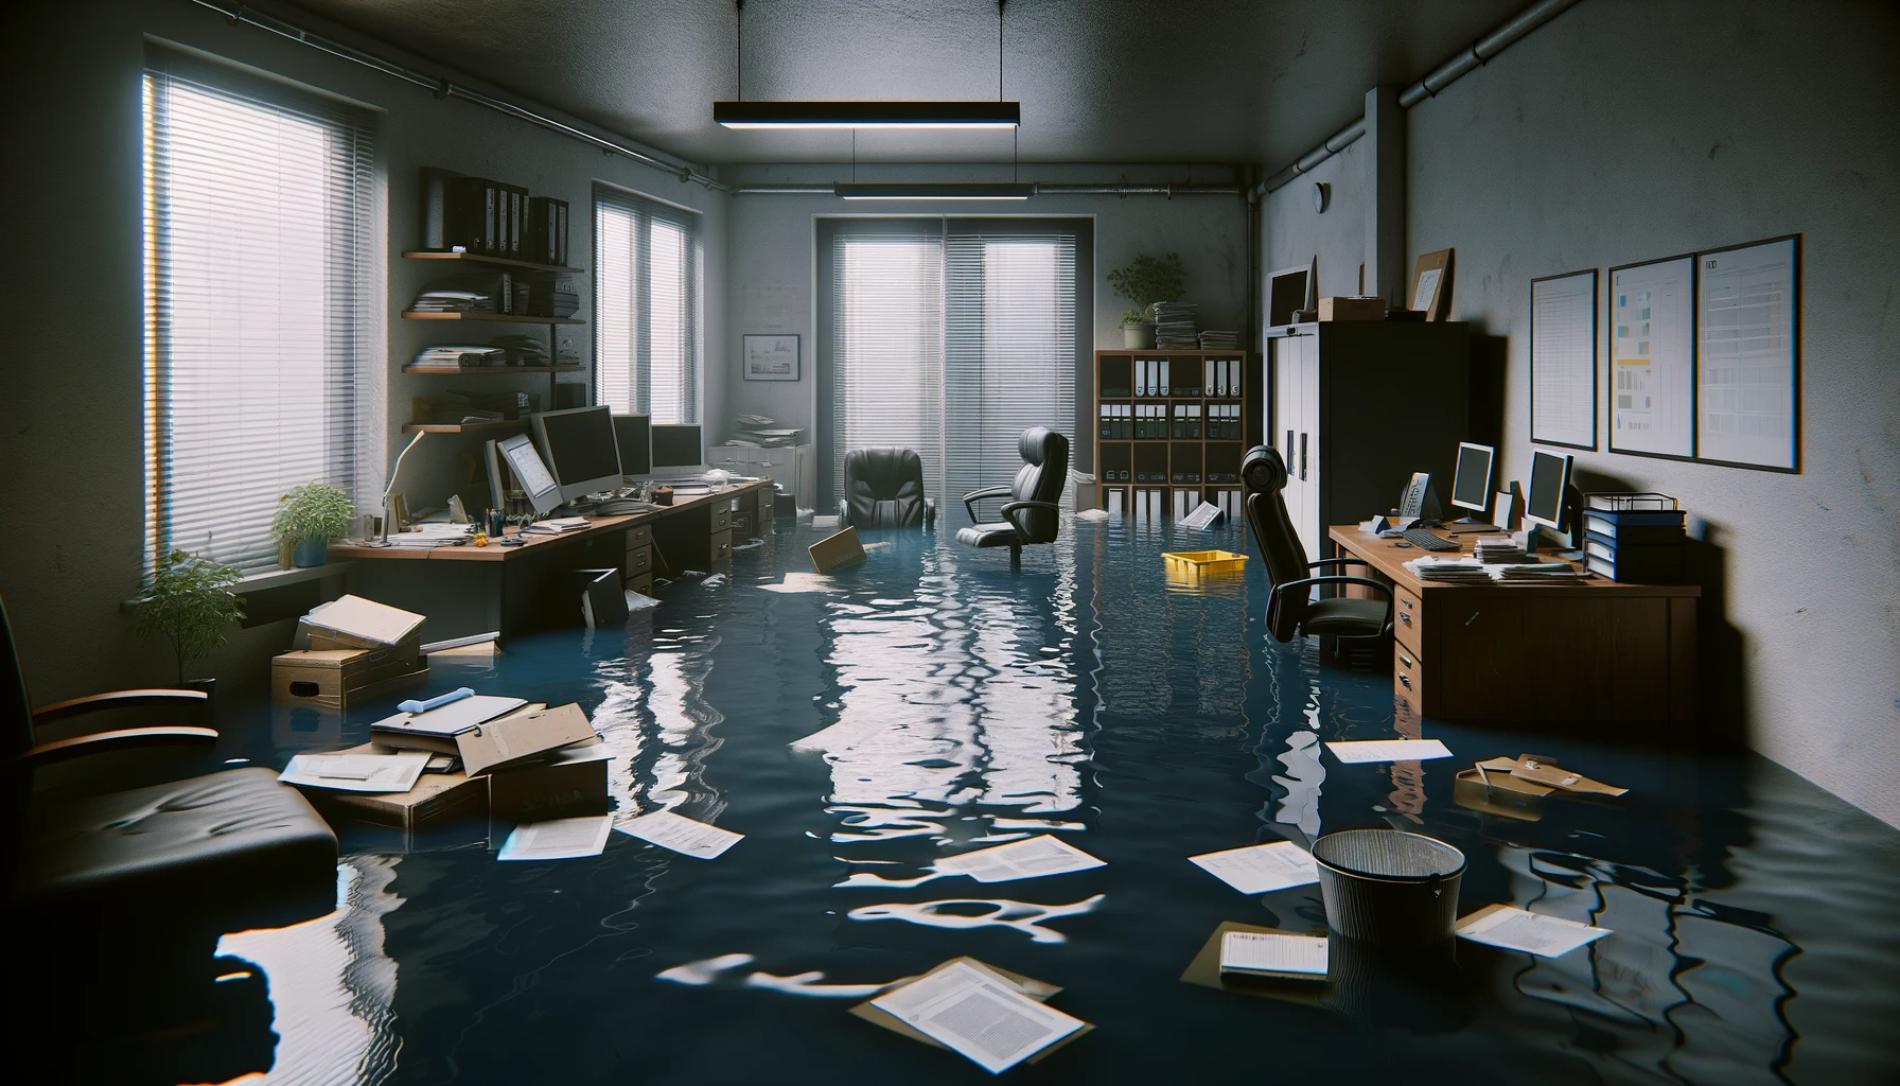 A flooded office with papers floating